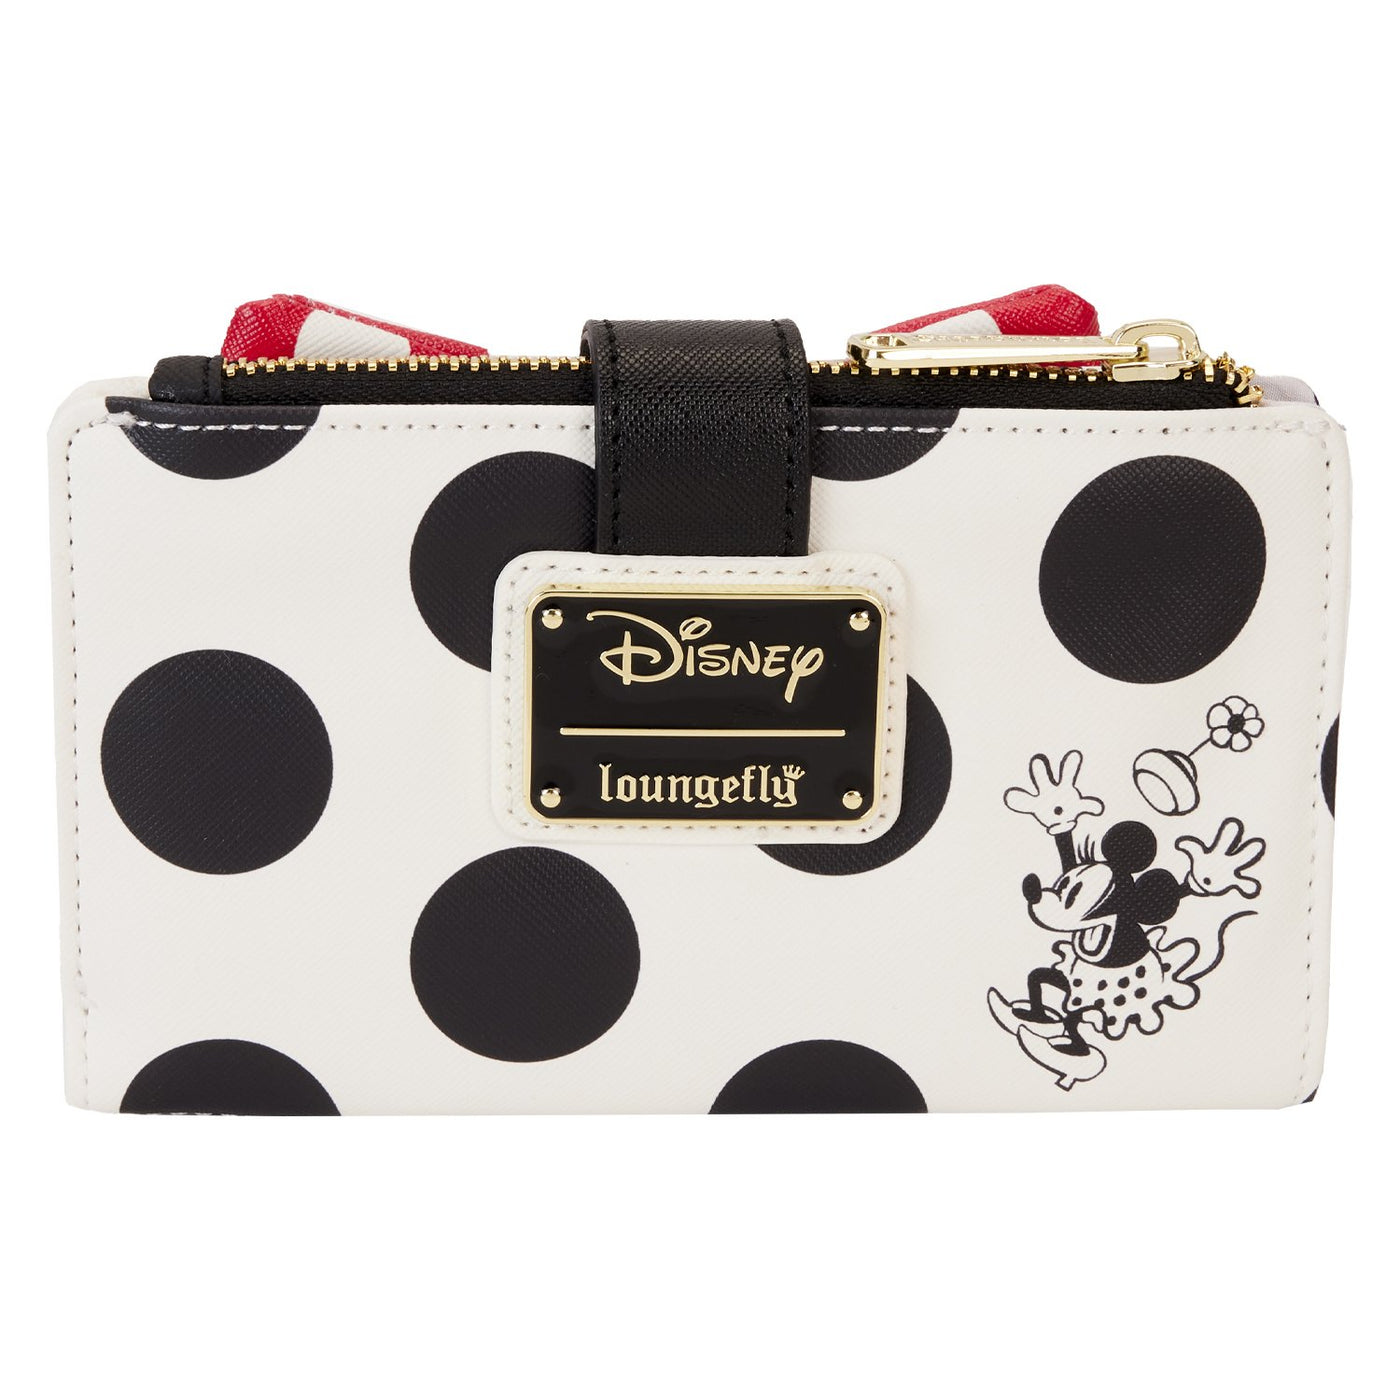 Loungefly Disney Minnie Rocks the Dots Classic Flap Wallet - Back